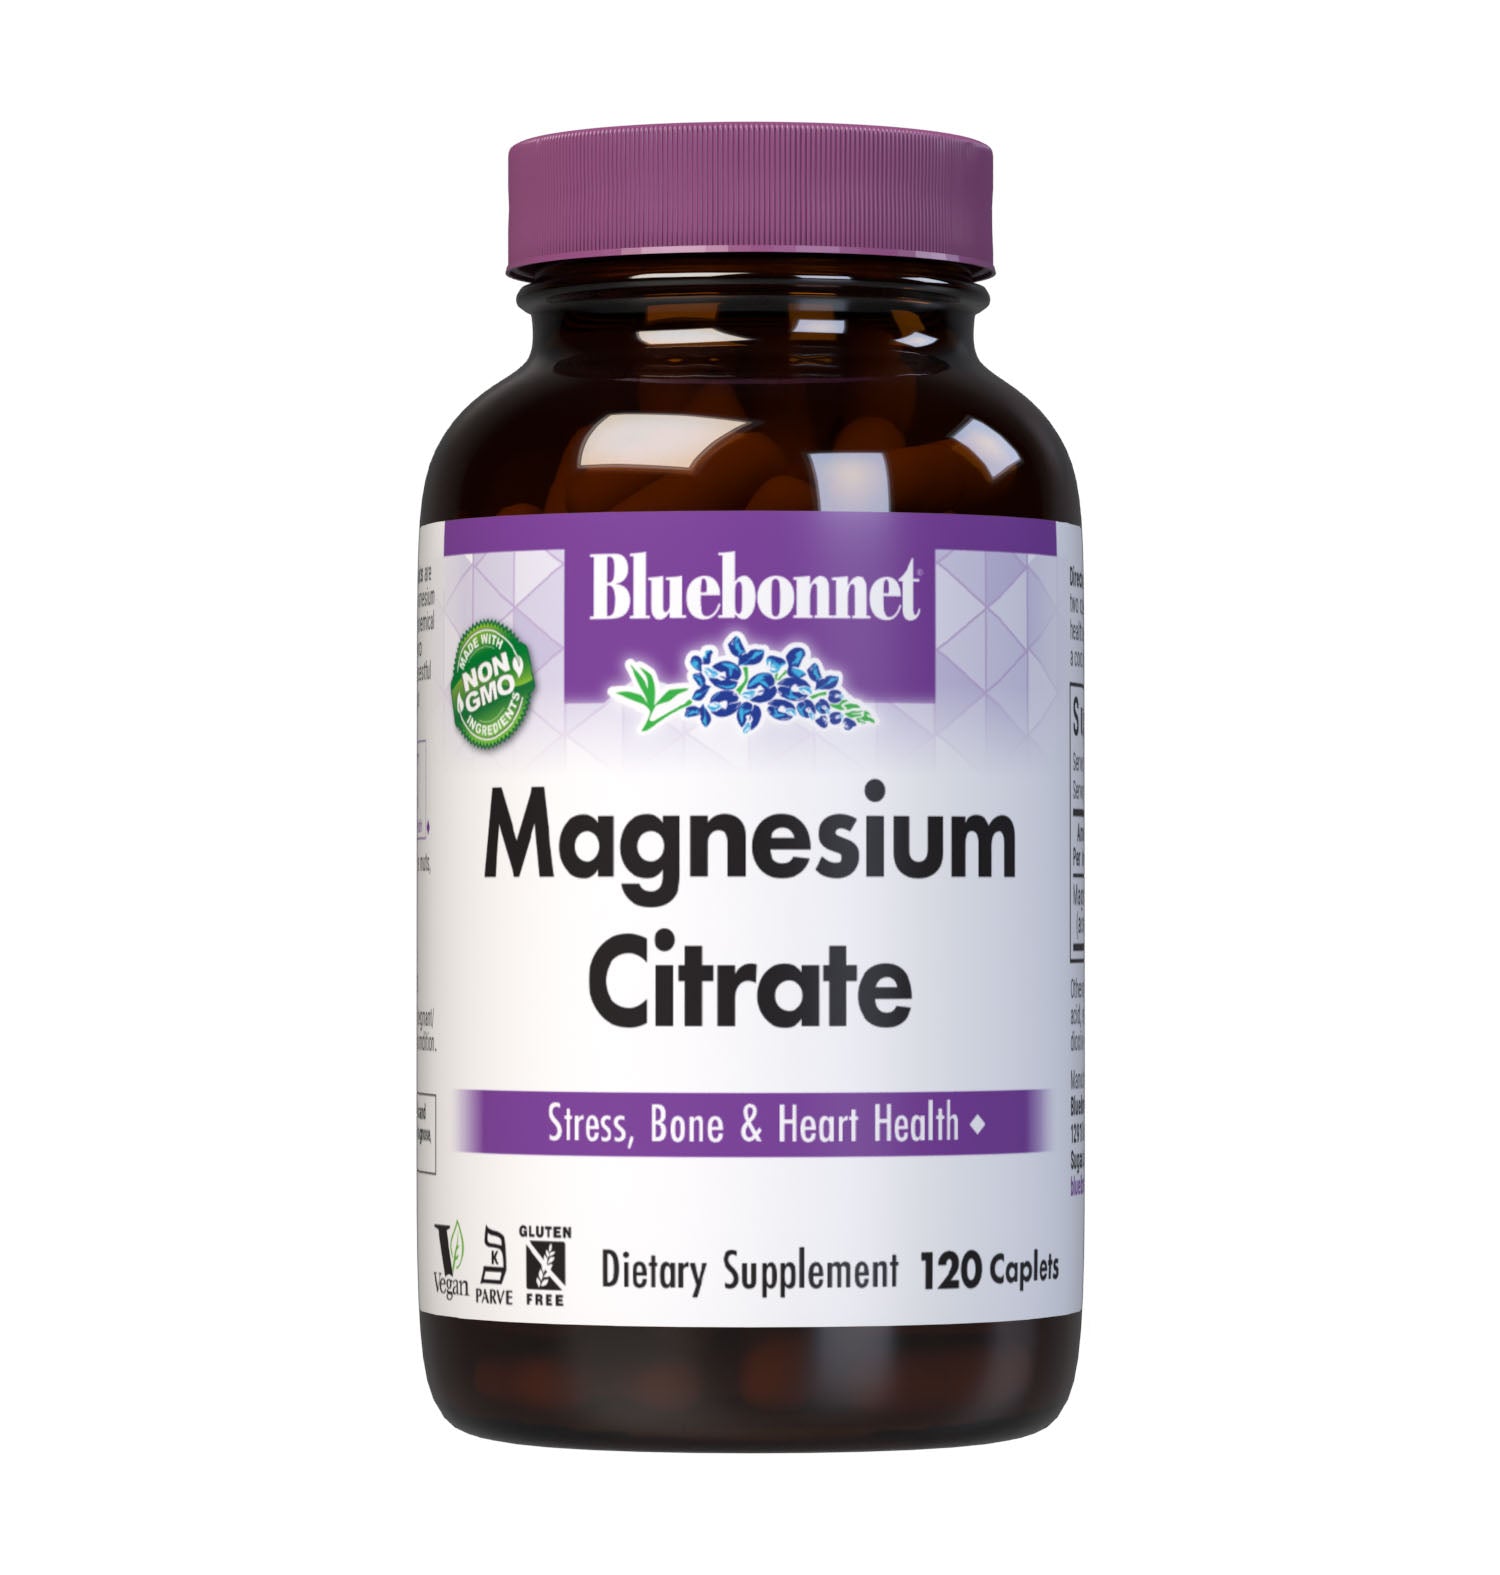 Bluebonnet's Magnesium Citrate 400 mg 120 Caplets are formulated with magnesium in a chelate of magnesium citrate. Magnesium is required in over 300 biochemical reactions in the body but is primarily known to calm the mind and body, reduce stress, induce restful sleep, increase bone density, as well as support immune and cardiovascular health. #size_120 count